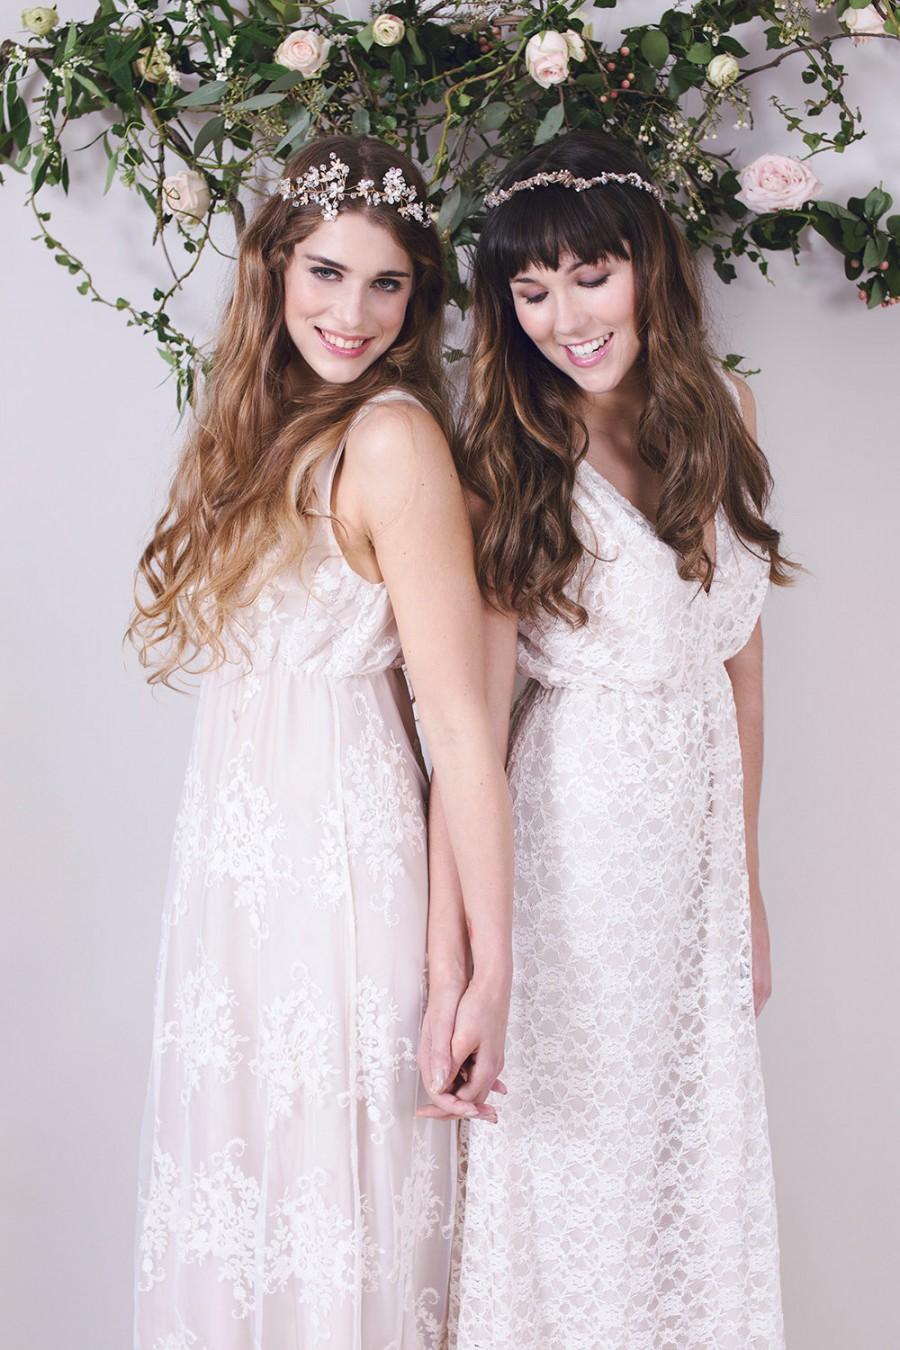 Mariage - EVA - Blush bridal gown - nude bridal with guipiere lace - boho bride - woodlands wedding - bridesmaid or maid of honour dress